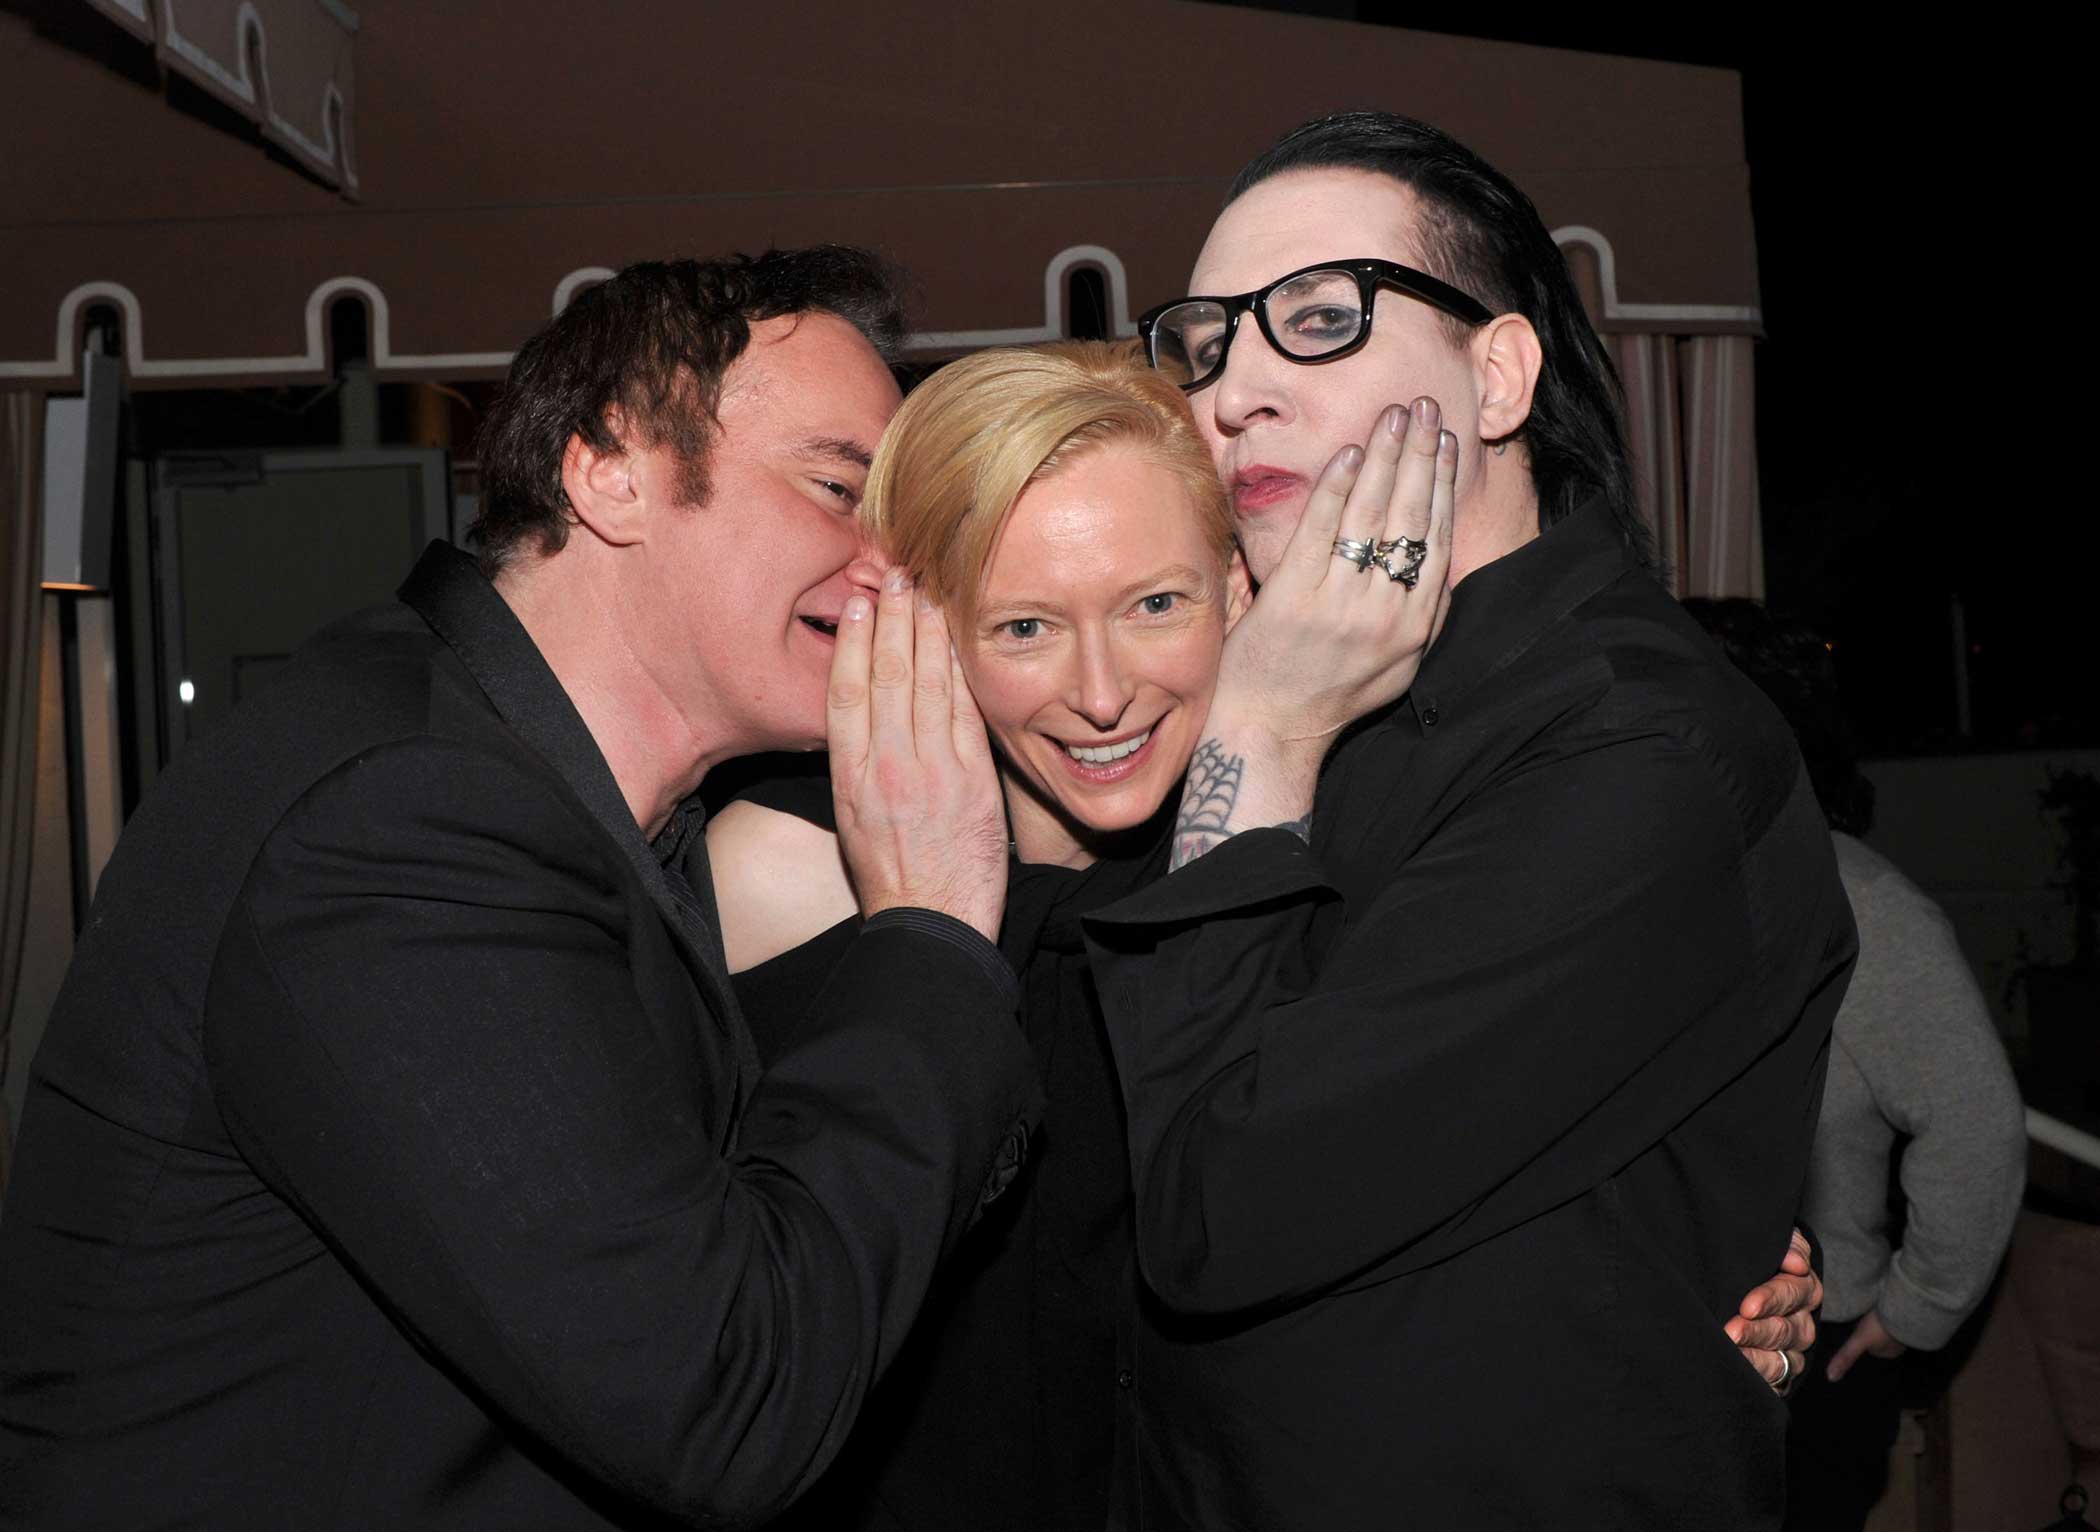 From left, Quentin Tarantino, Tilda Swinton and Marilyn Manson attend the "I Am Love" reception on Jan. 13, 2011 in West Hollywood, Calif.